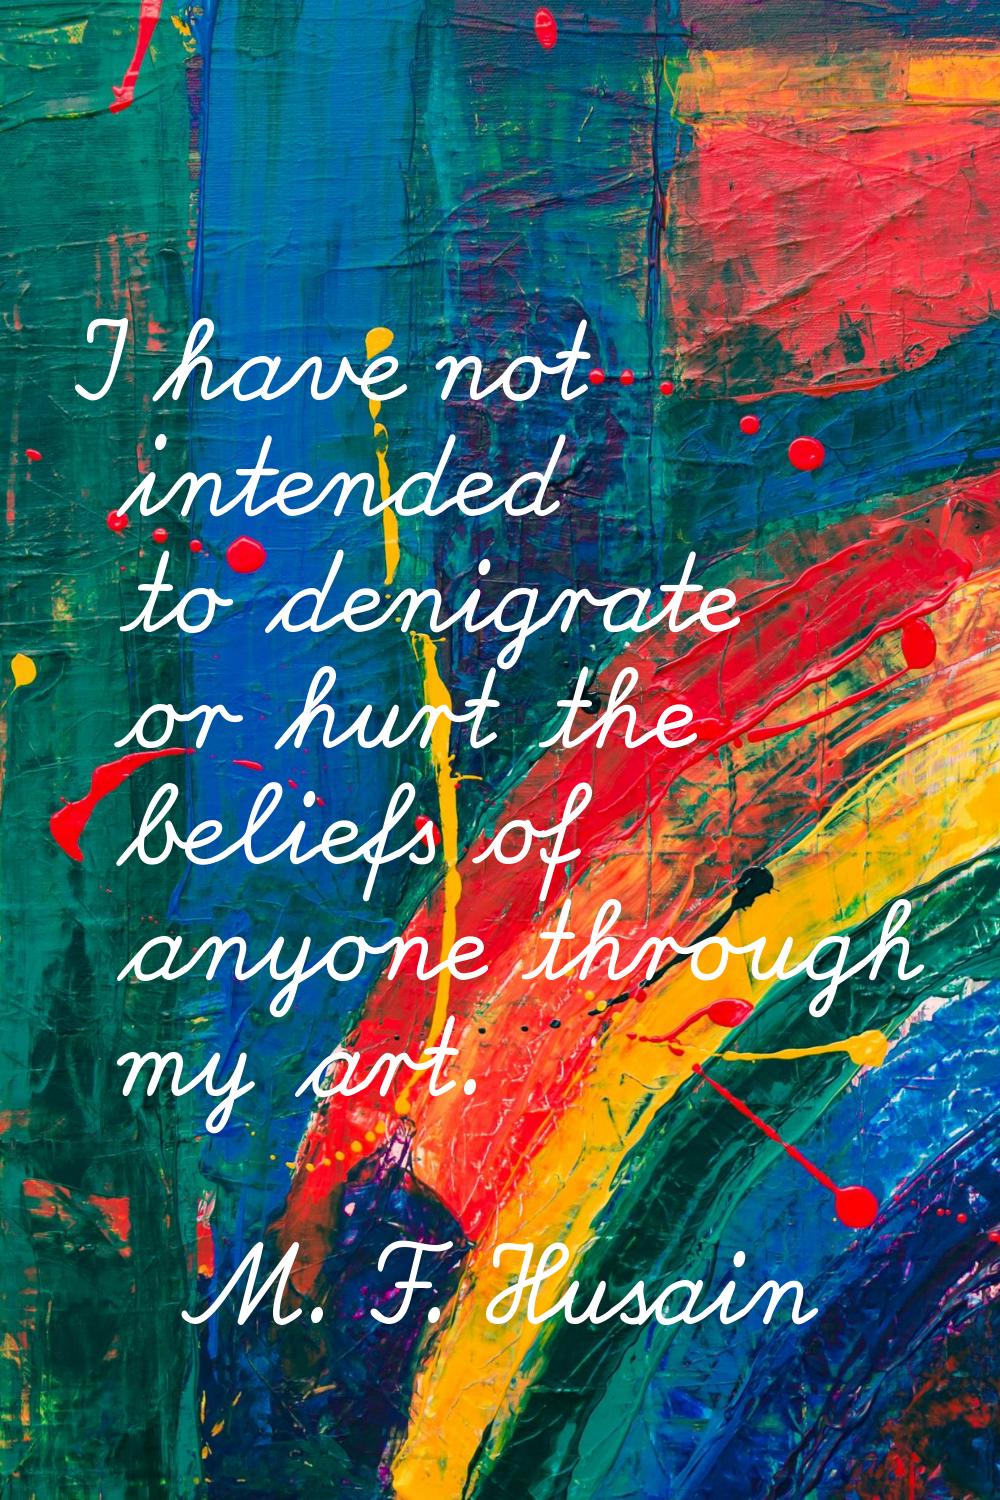 I have not intended to denigrate or hurt the beliefs of anyone through my art.